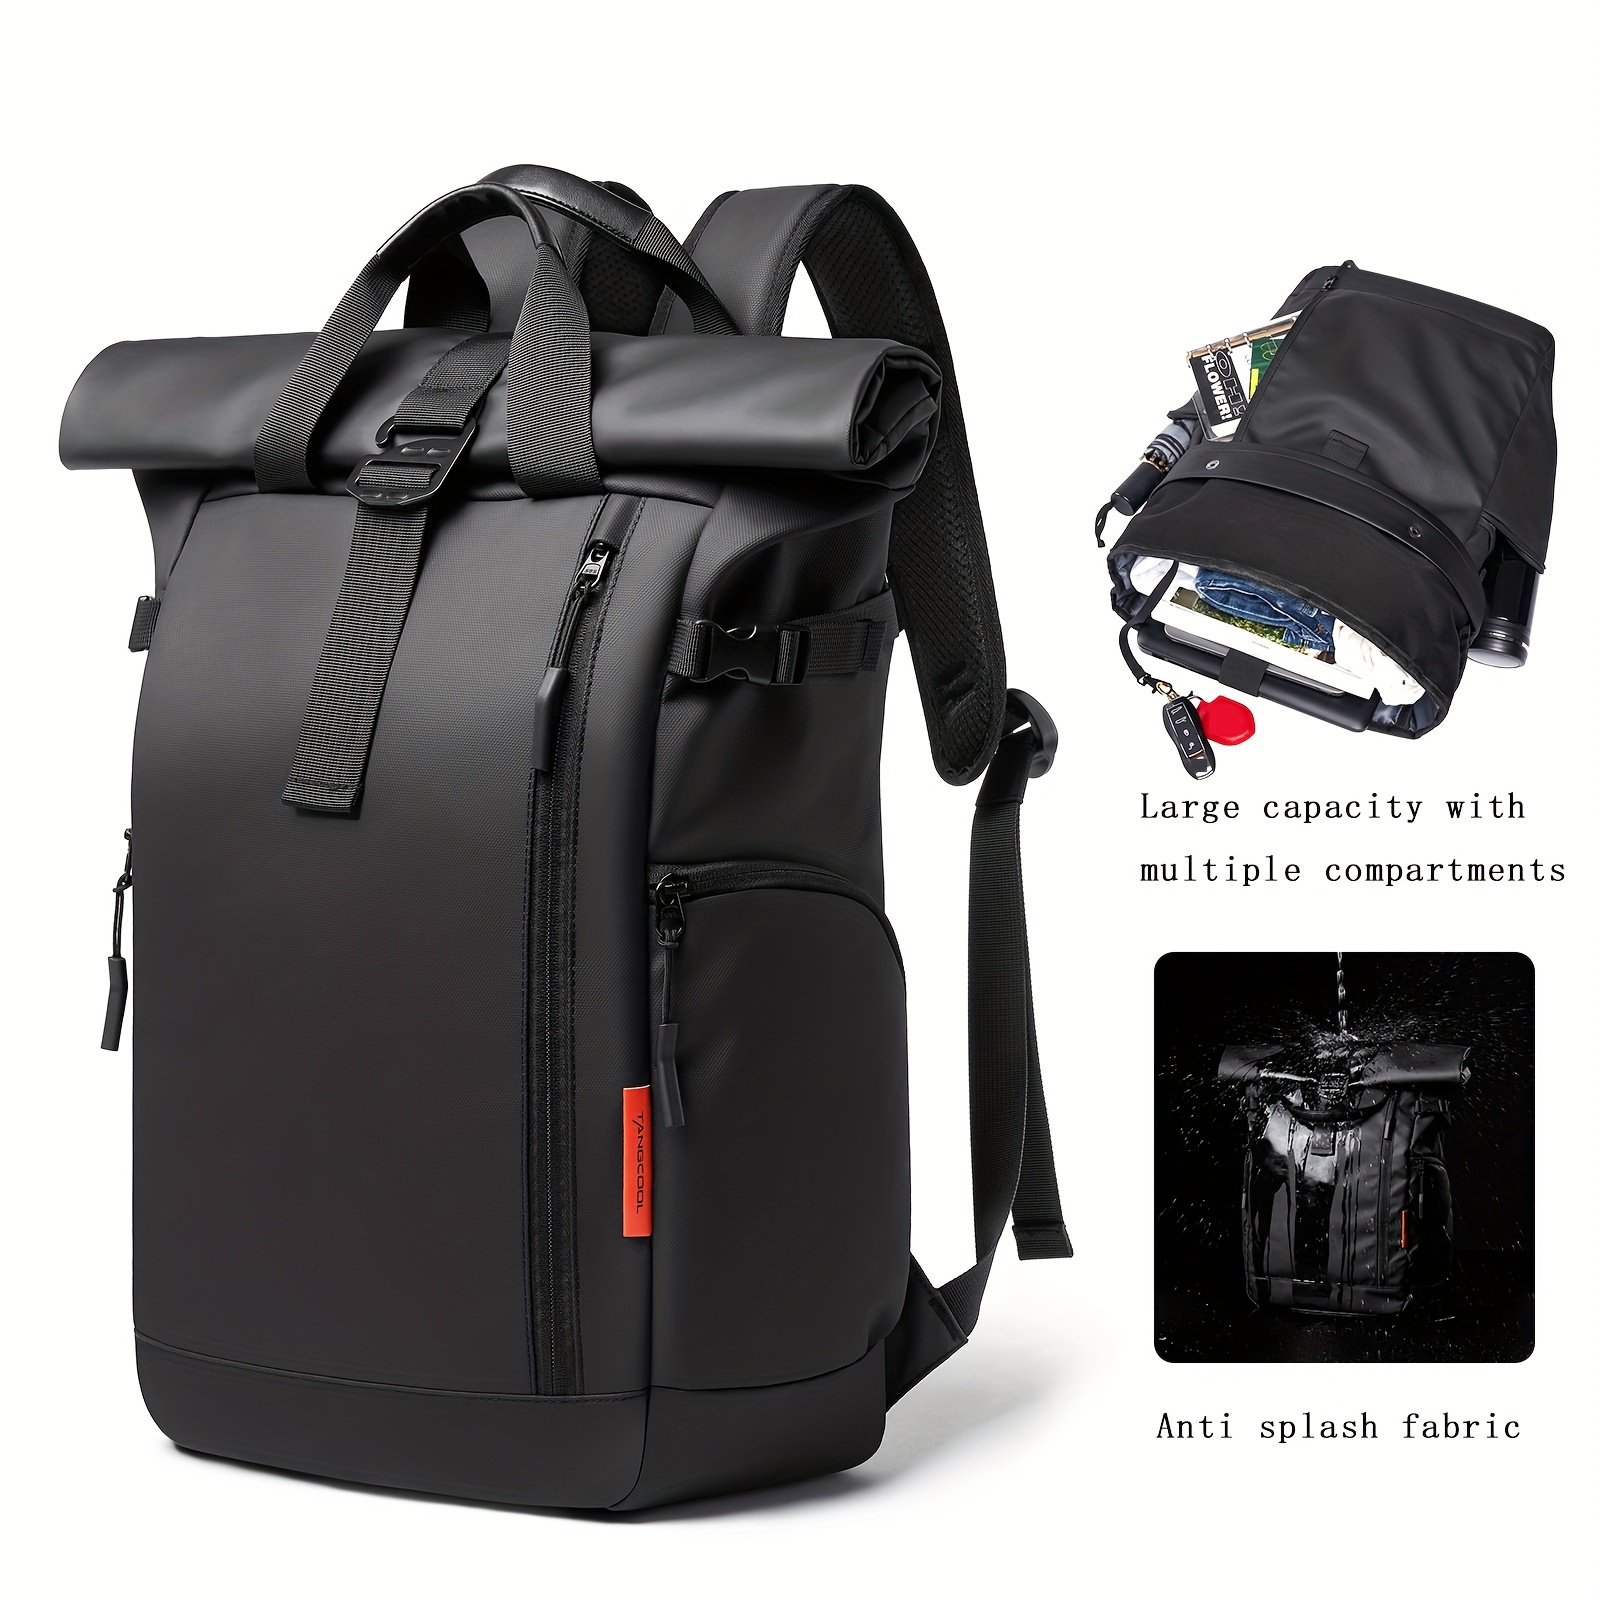 

Fashionable Business Backpack For Men, Large Capacity Student Bag For Laptops, Waterproof Oxford Cloth Backpack For Travel, Suitable For Commuting And Outdoor Travel, Lightweight With Multiple Pockets